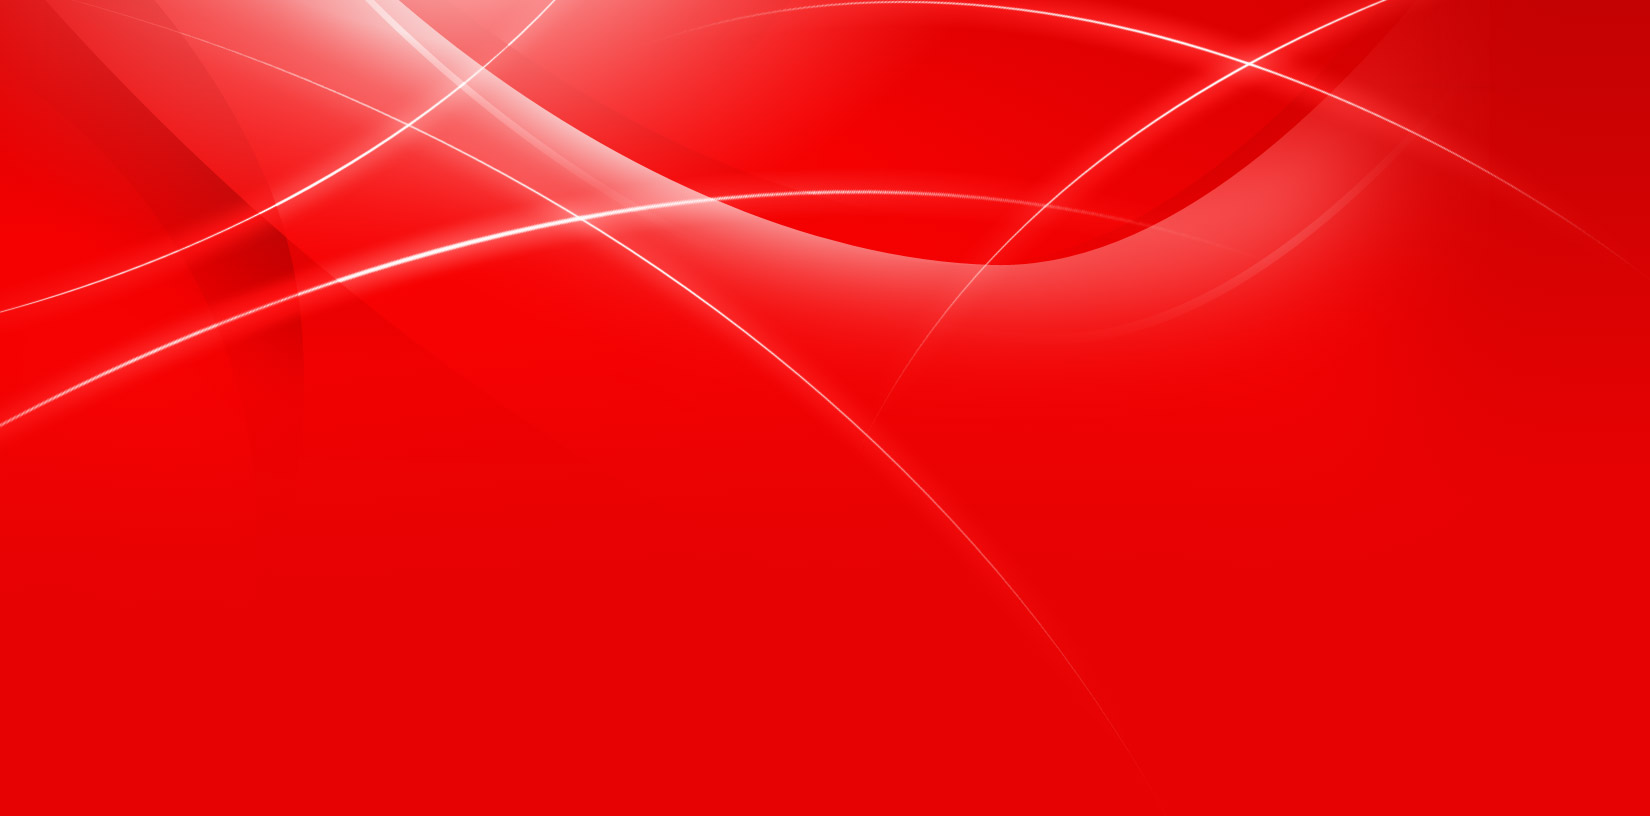 The Best 15 Red Gradient Background Images High Quality Images